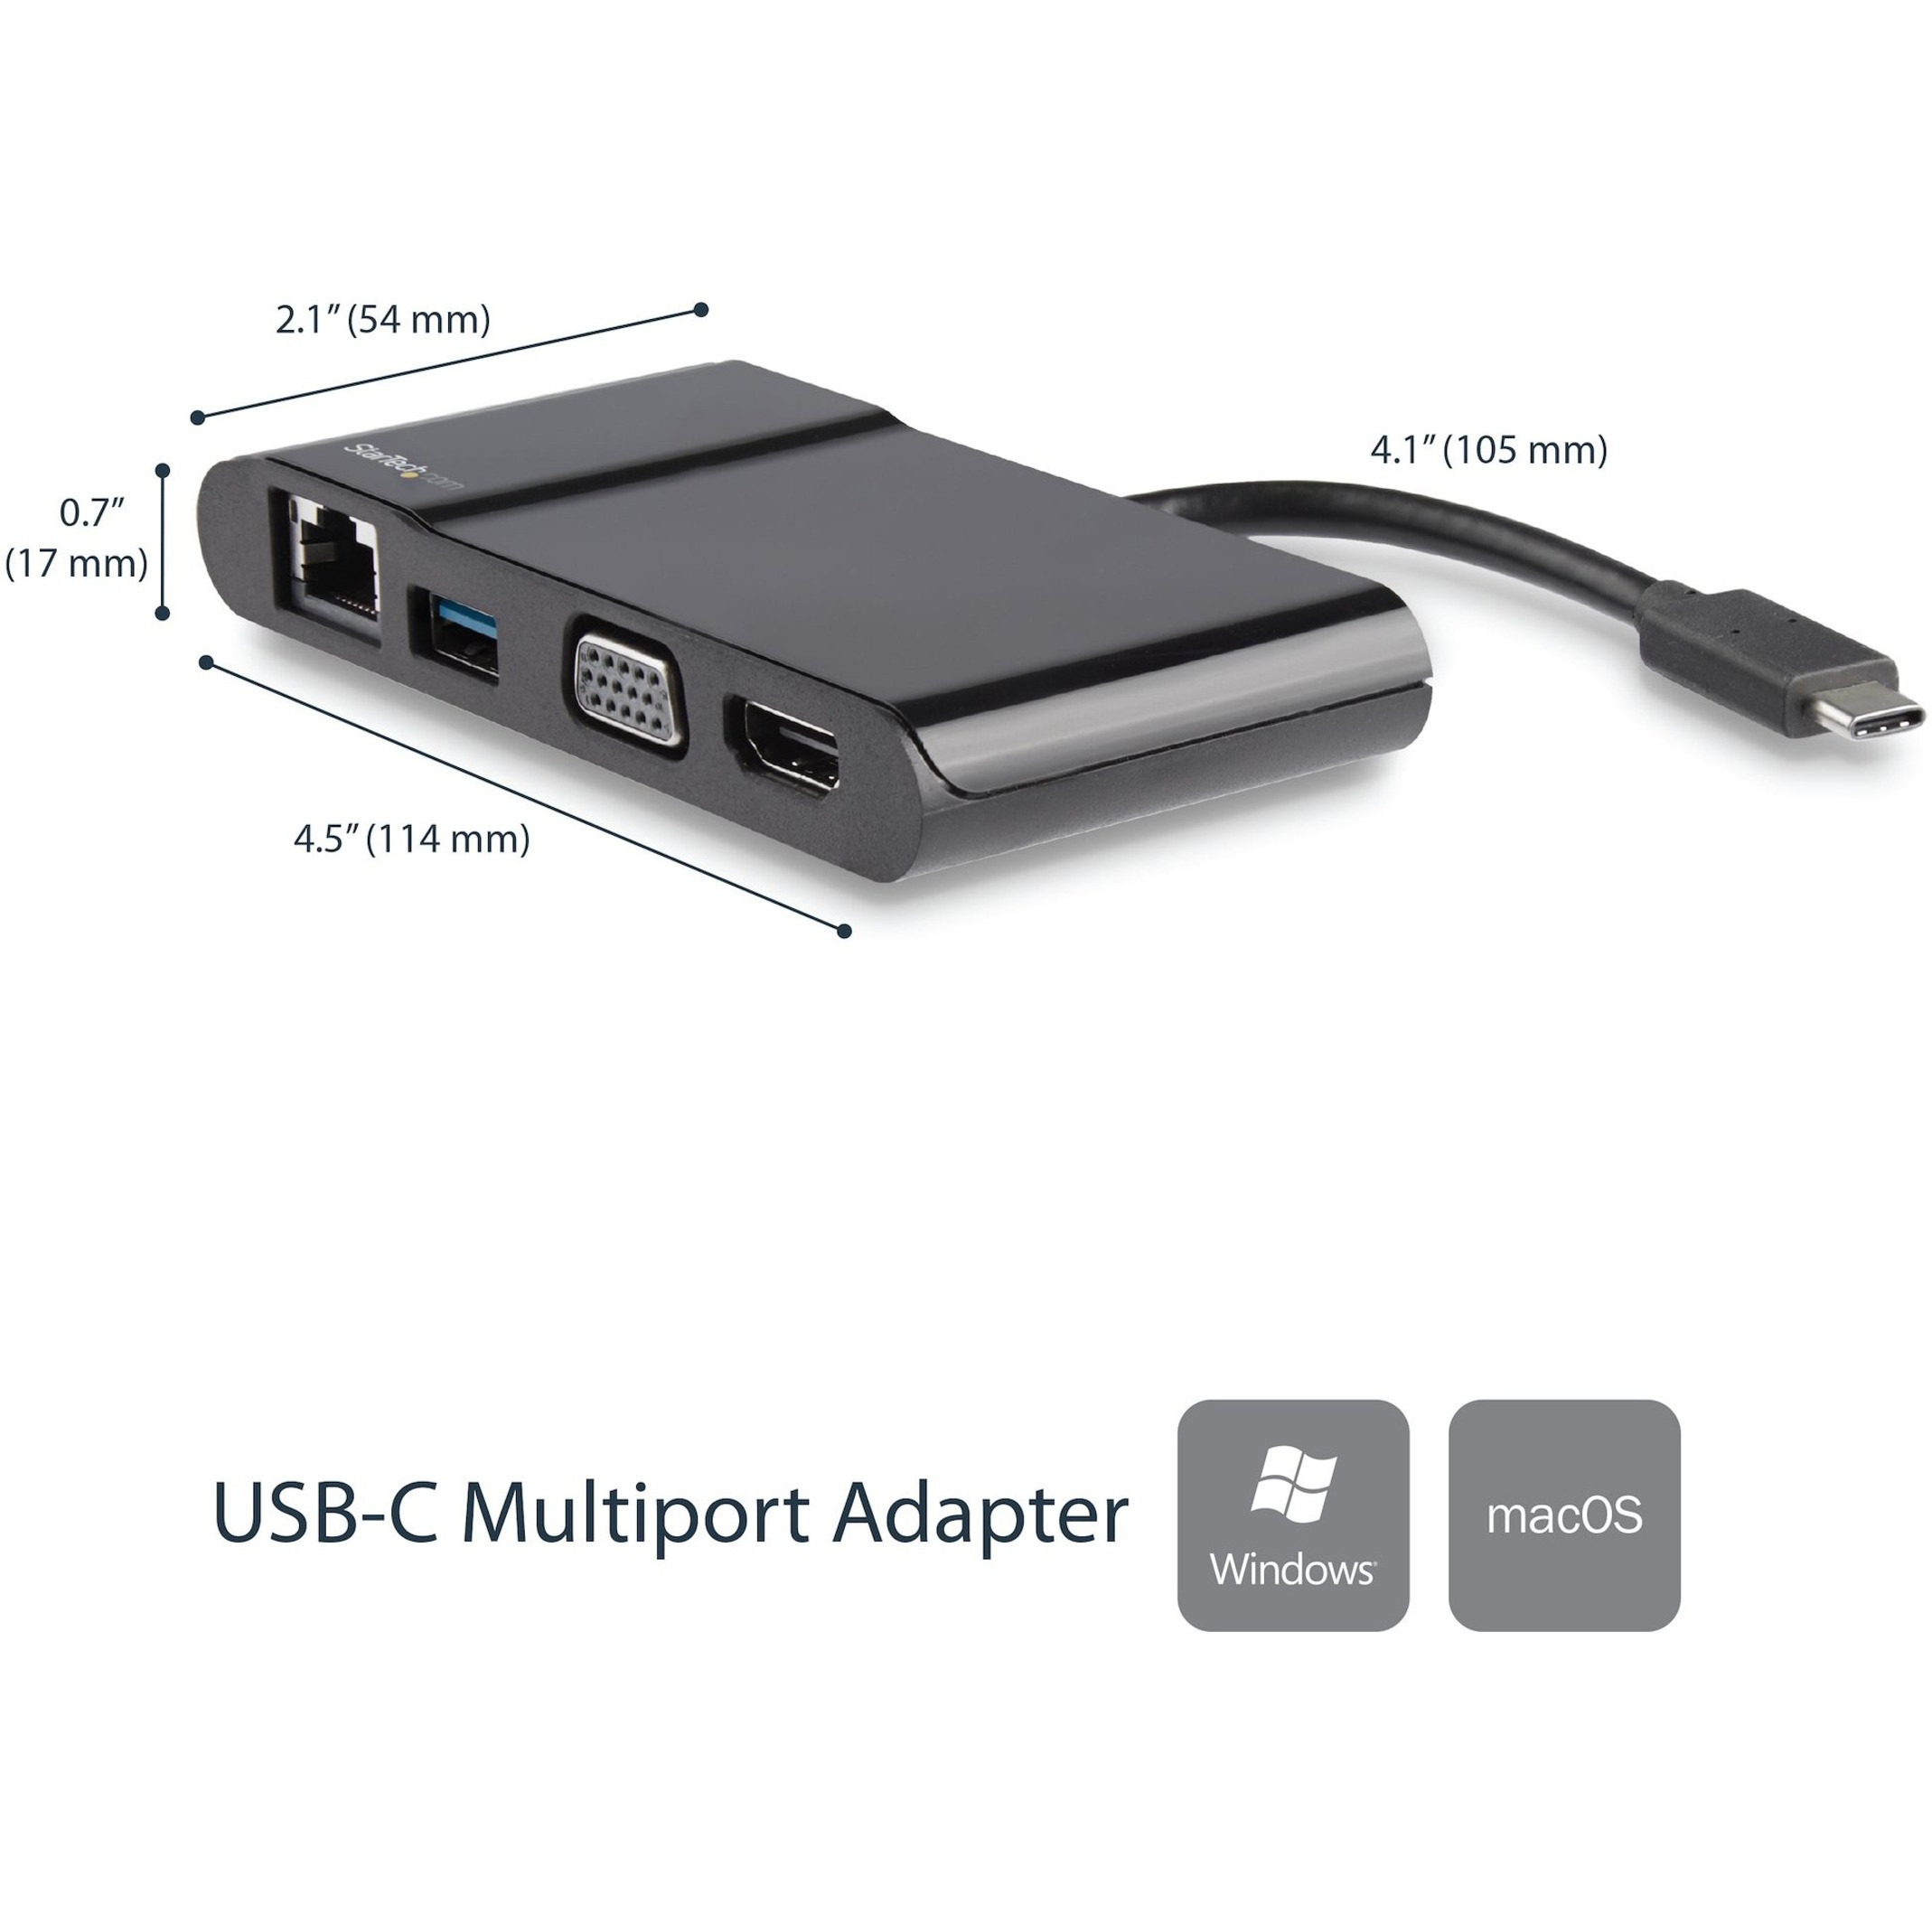 Startech .com USB-C Multiport Adapter for Laptops4K HDMI VGA GbE USB  3HDMI/RJ-45/USB/VGA for Notebook, Chromebook, Projector, Monitor, Wor  DKT30CHV - Corporate Armor